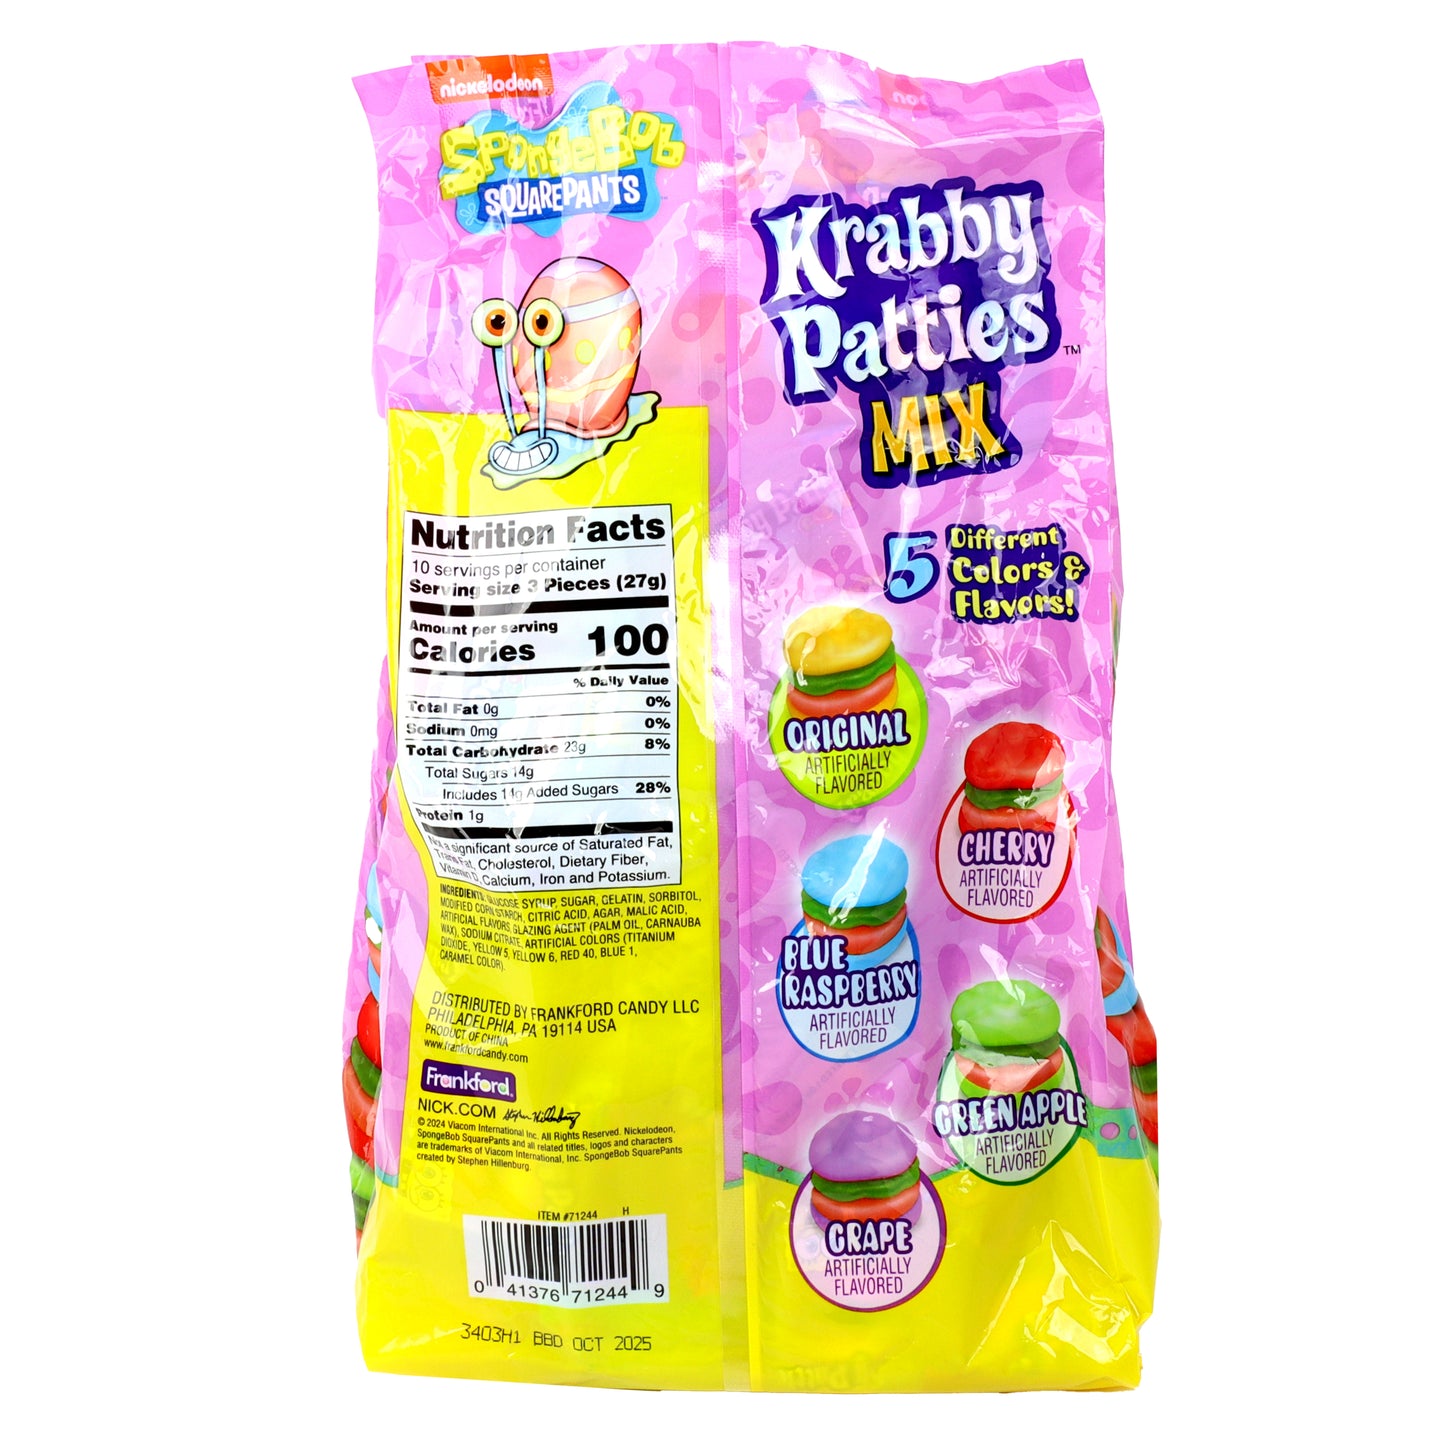 back ofpink and yellow bag filled with colorful krabby patties and nutrition label